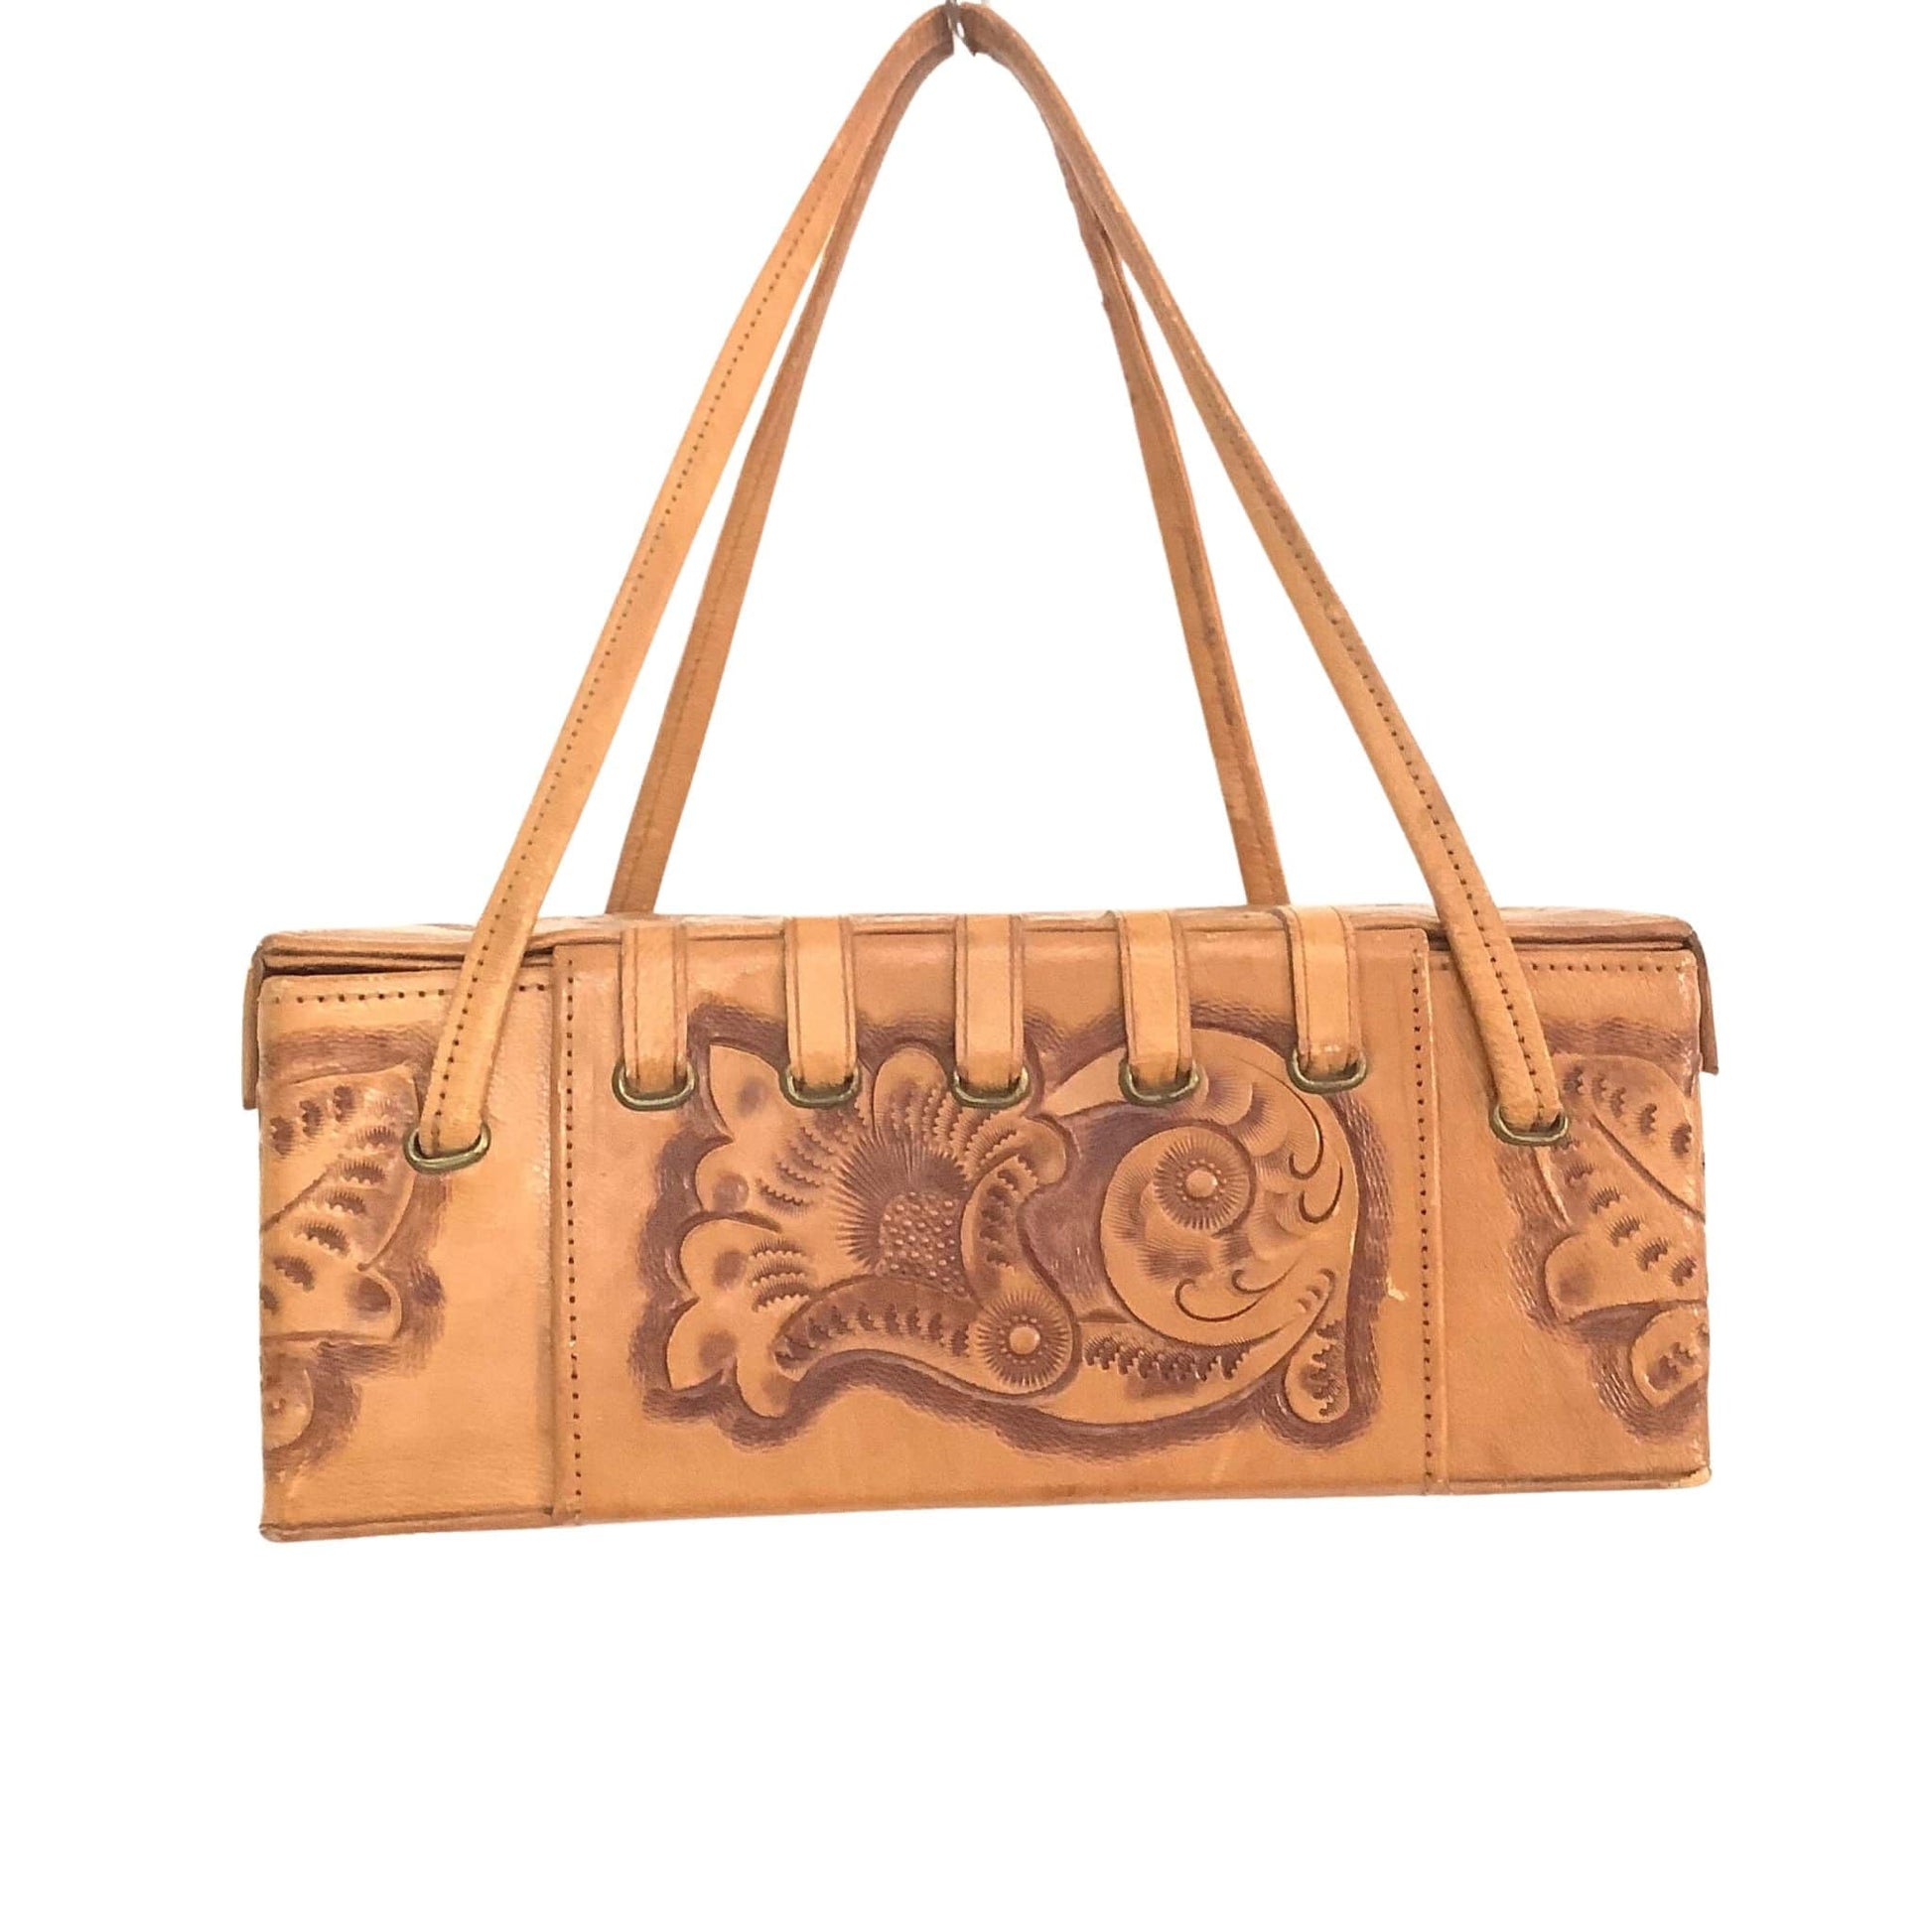 1930s Tooled Leather Bag Tan / Leather / Vintage 1930s